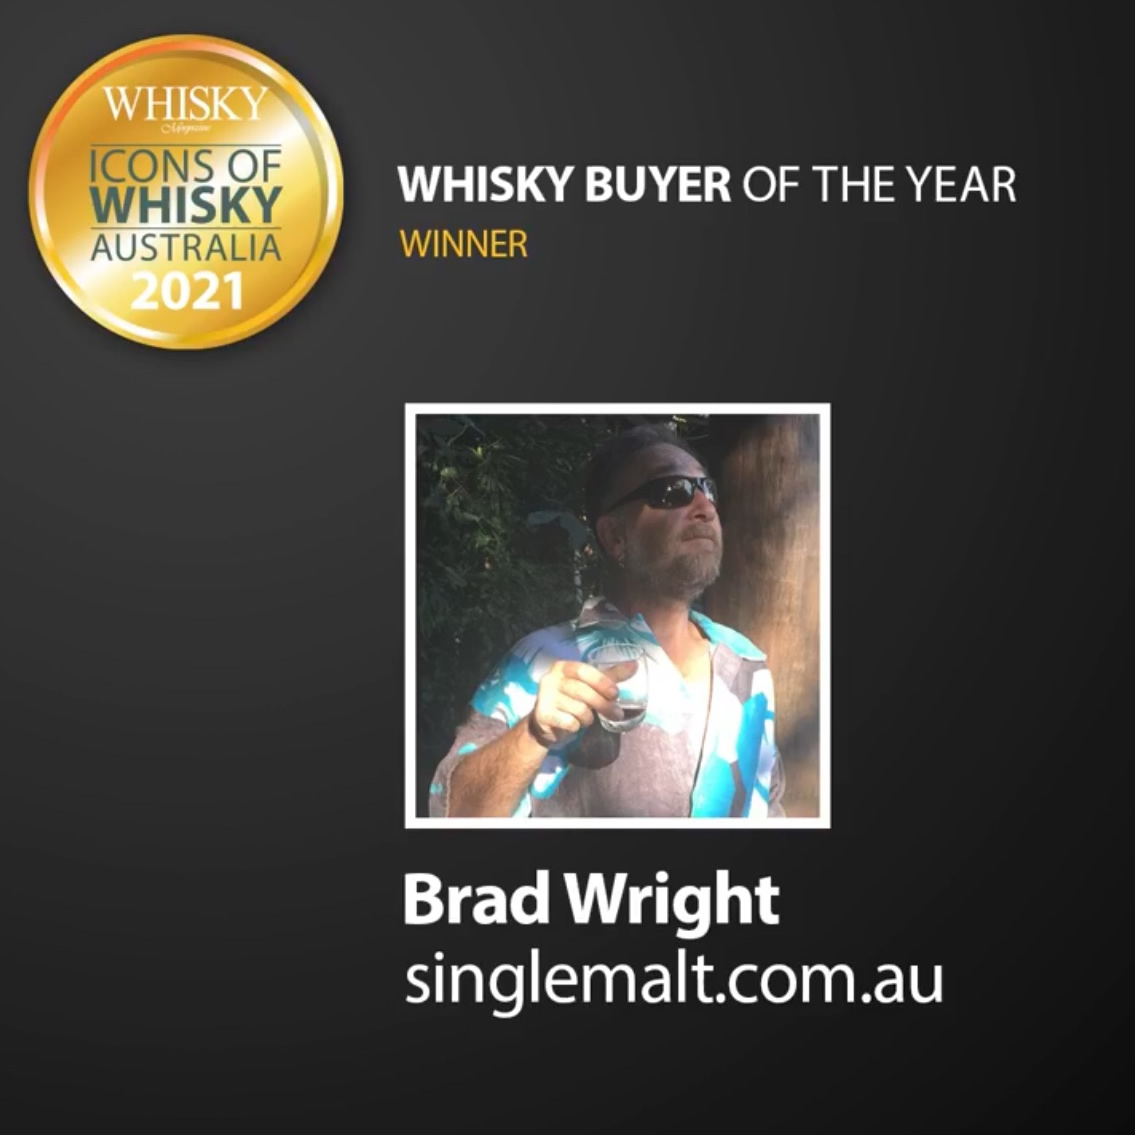 Icons of Whisky Awards Australian Whisky Buyer of the Year